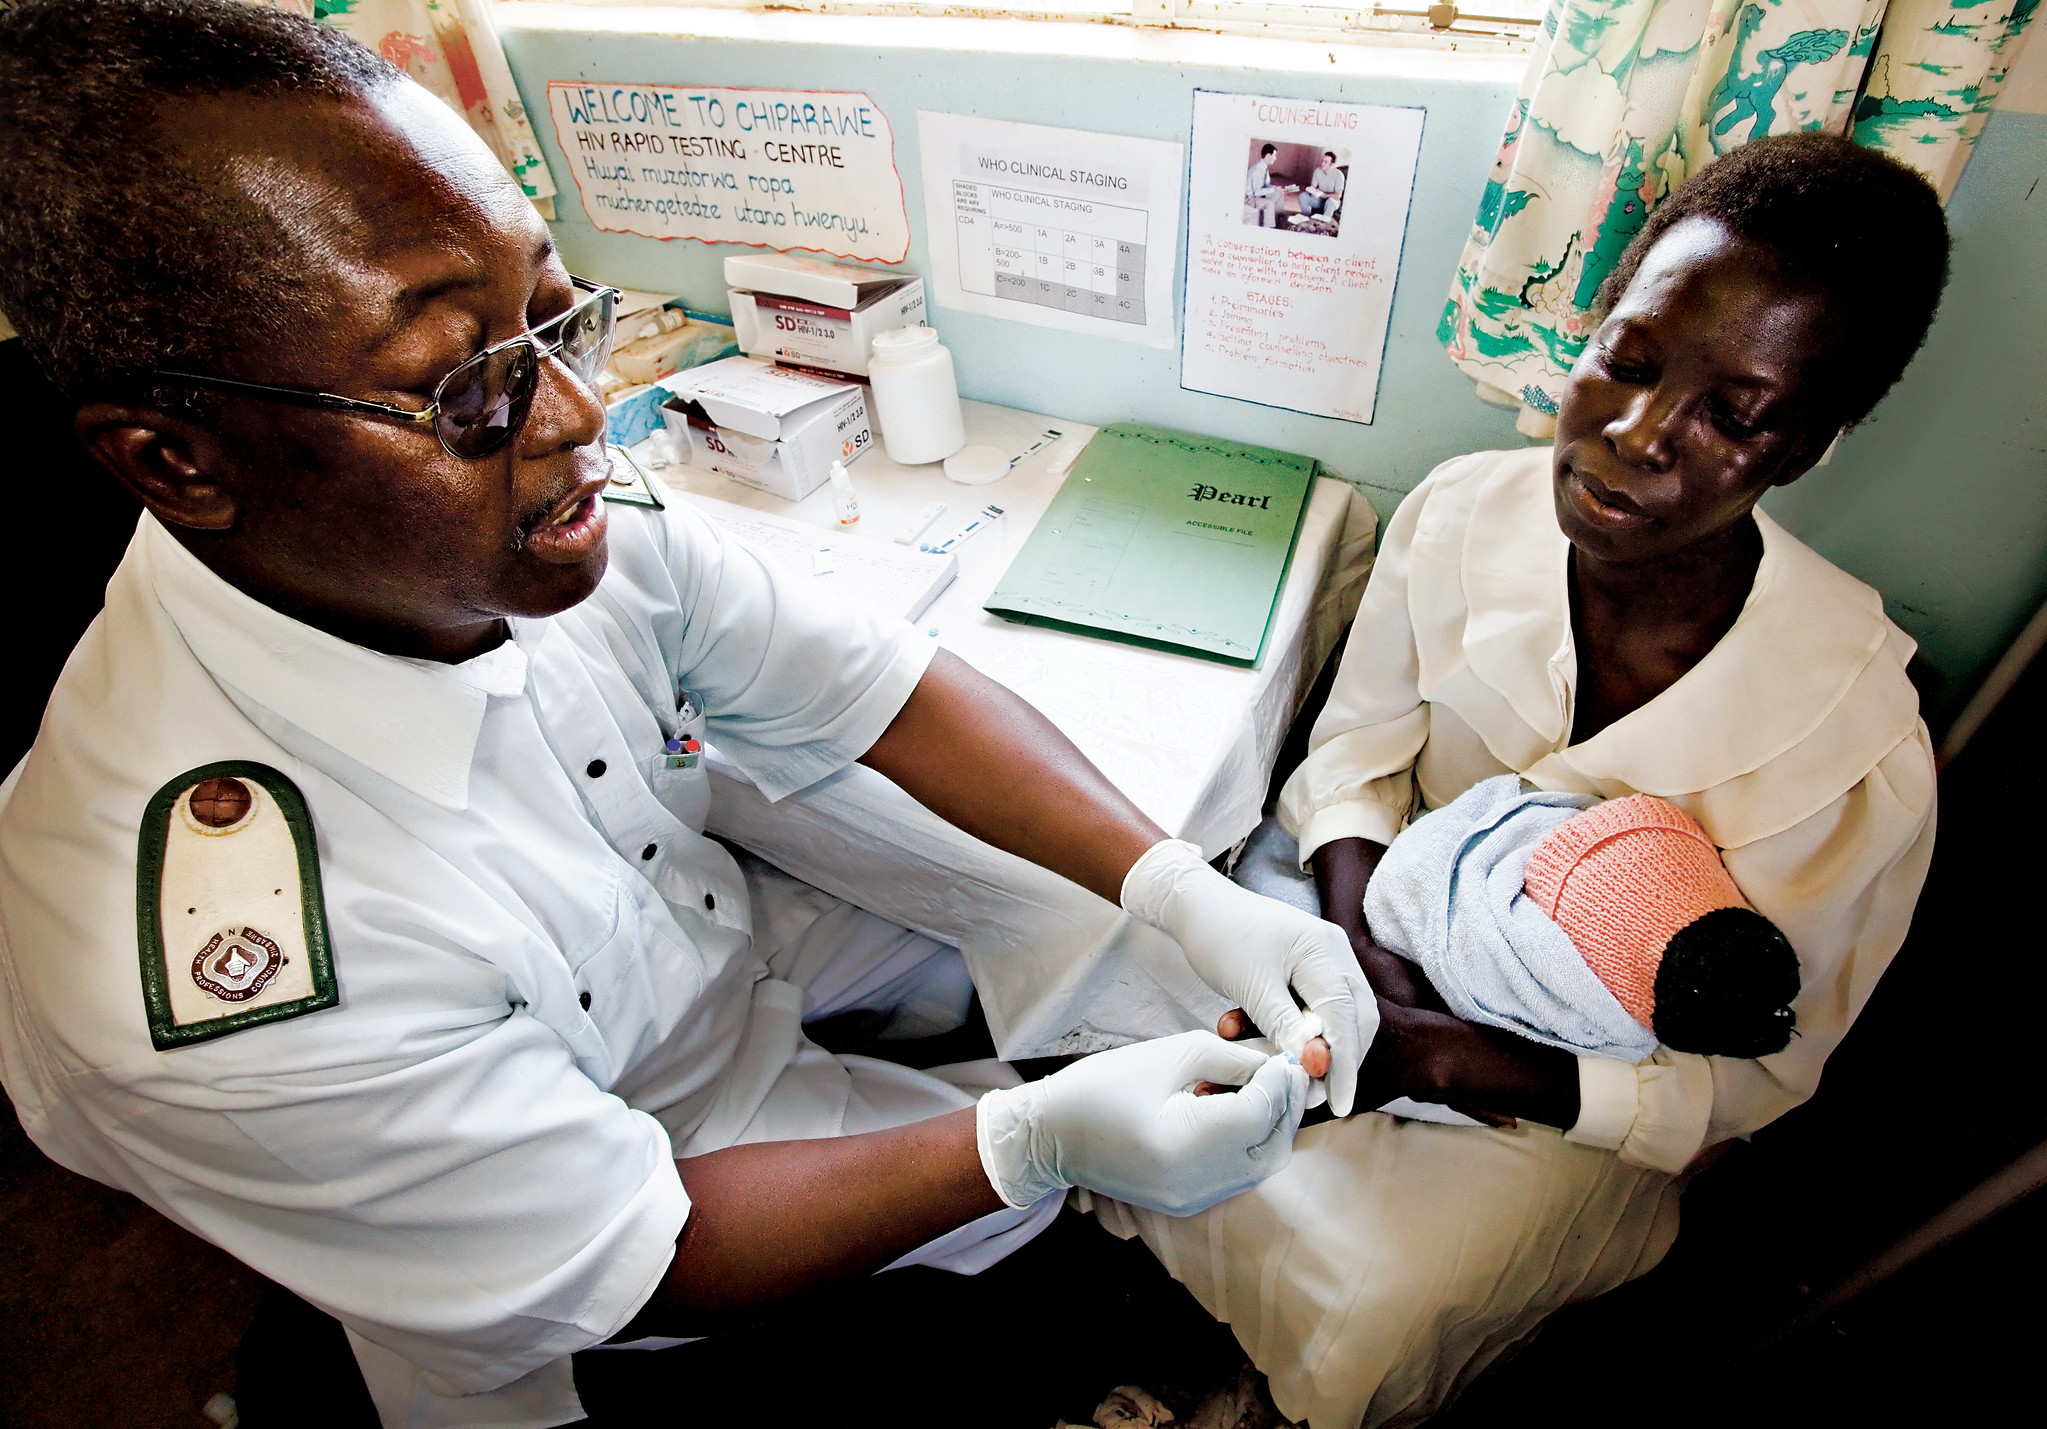 All HIV-exposed children need to be tested for HIV to allow early diagnosis and treatment initiation